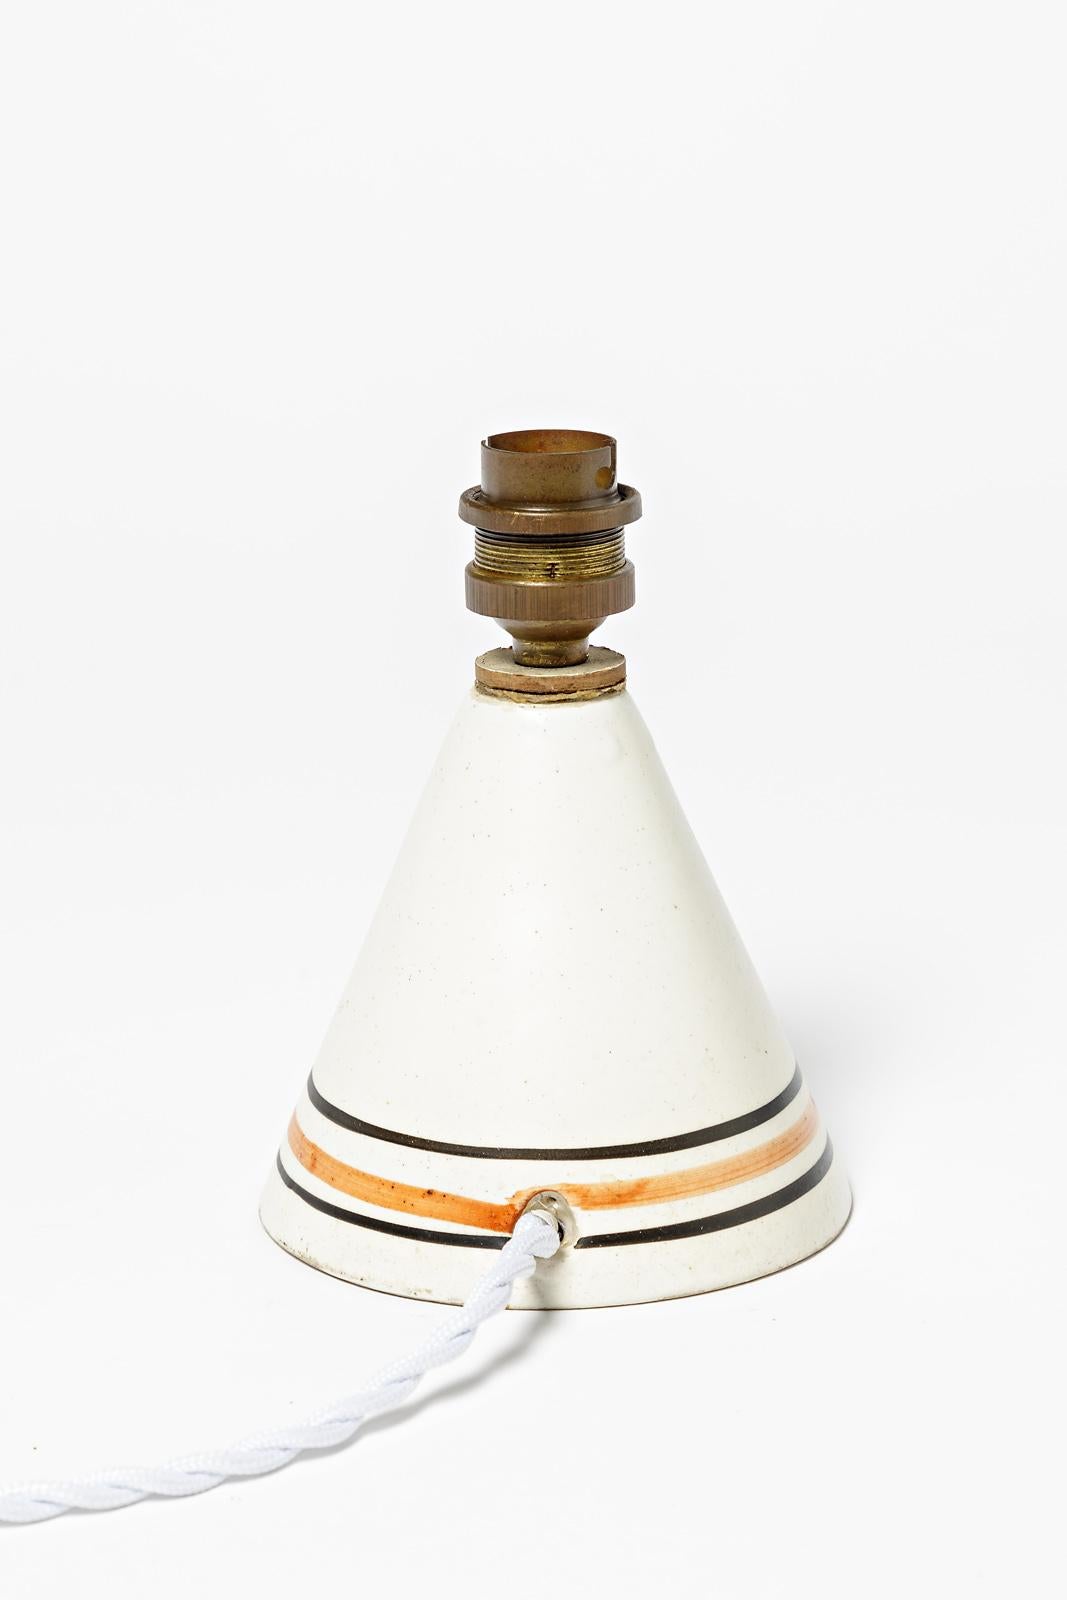 Mid-Century Modern White and Minimalist Ceramic Table Lamp by Roger Capron 1970 Midcentury Design